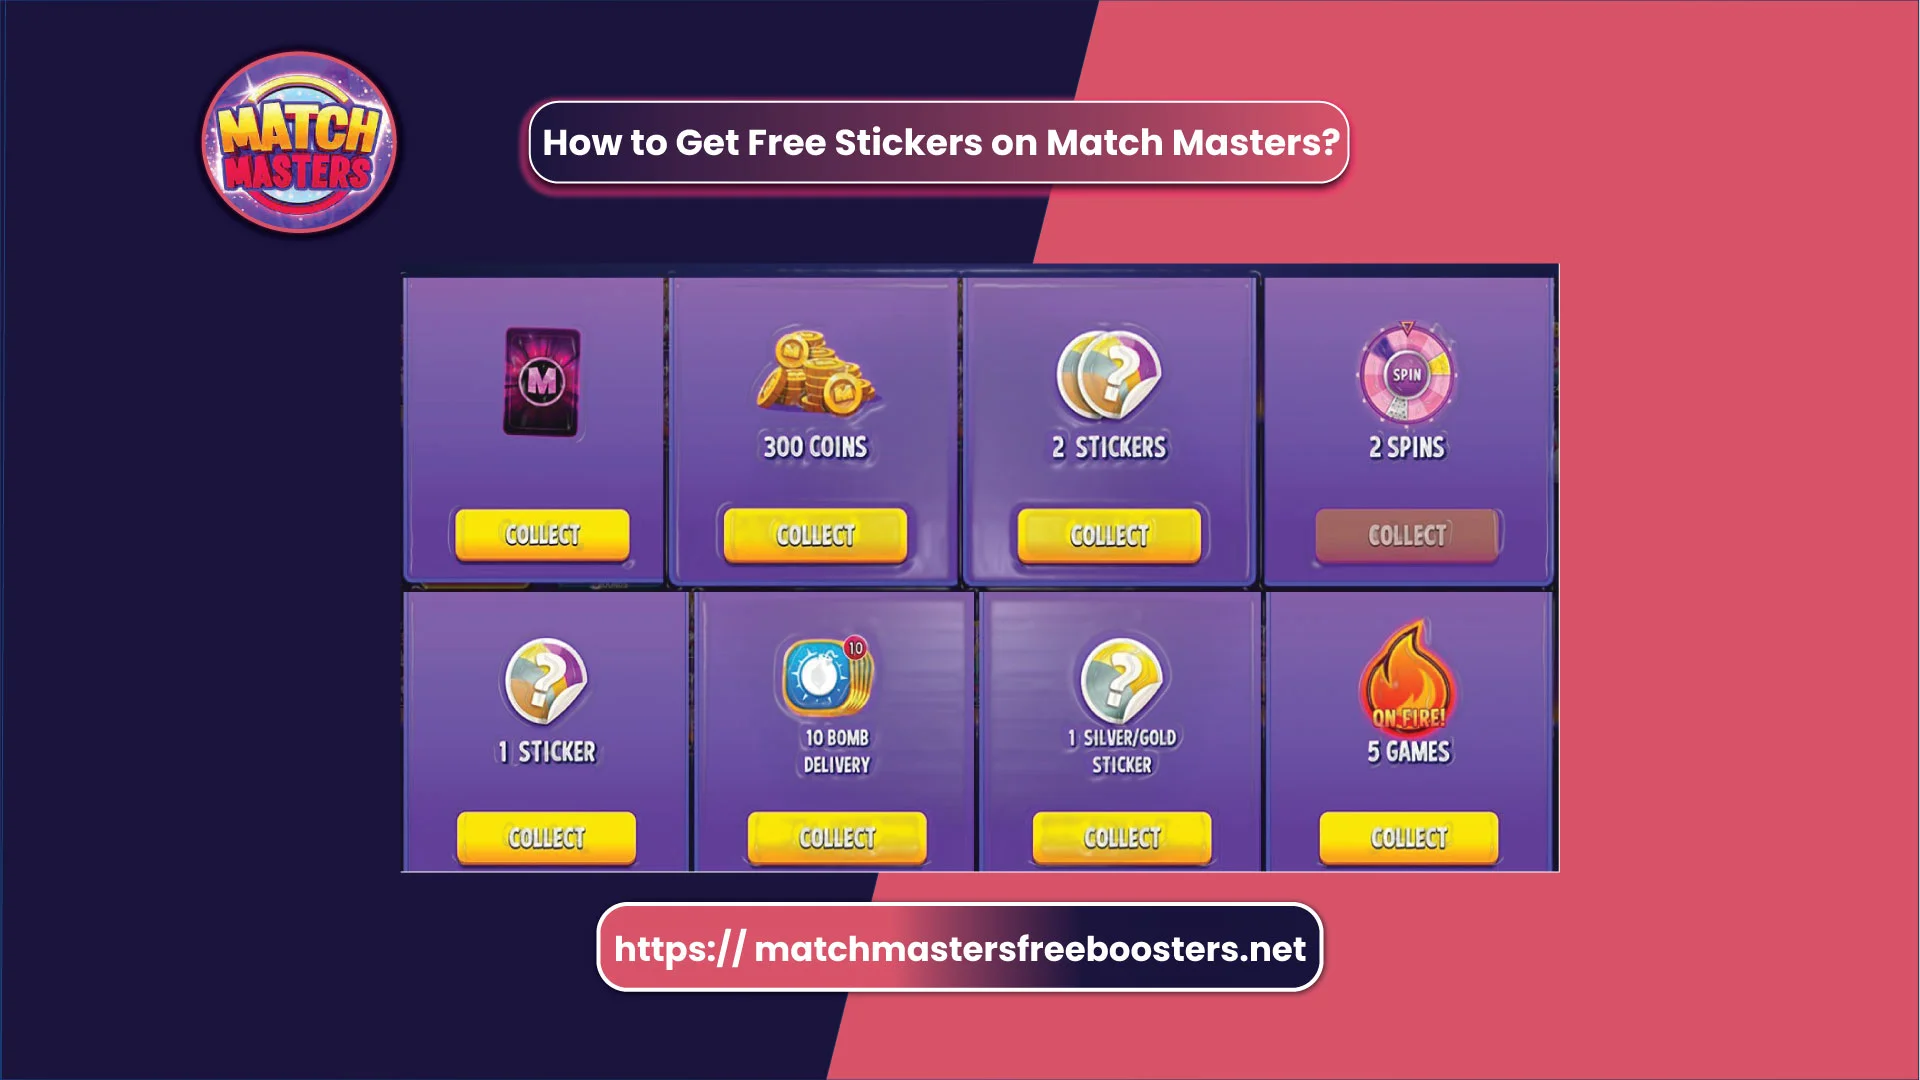 How to Get Free Stickers on Match Masters